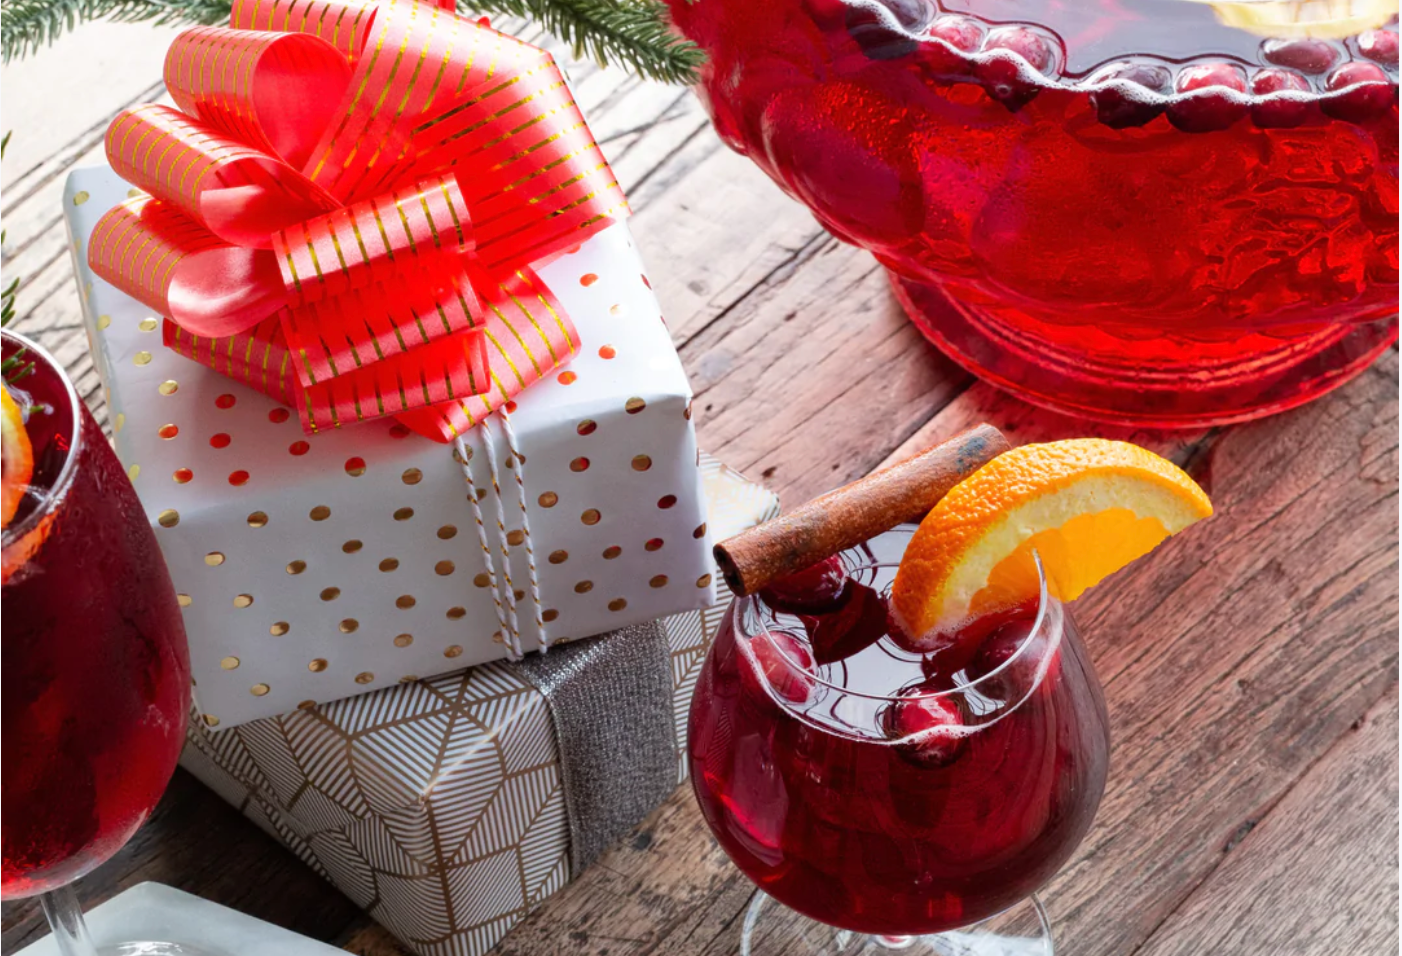 MULLED MERRY MAKER’S PUNCH RECIPE